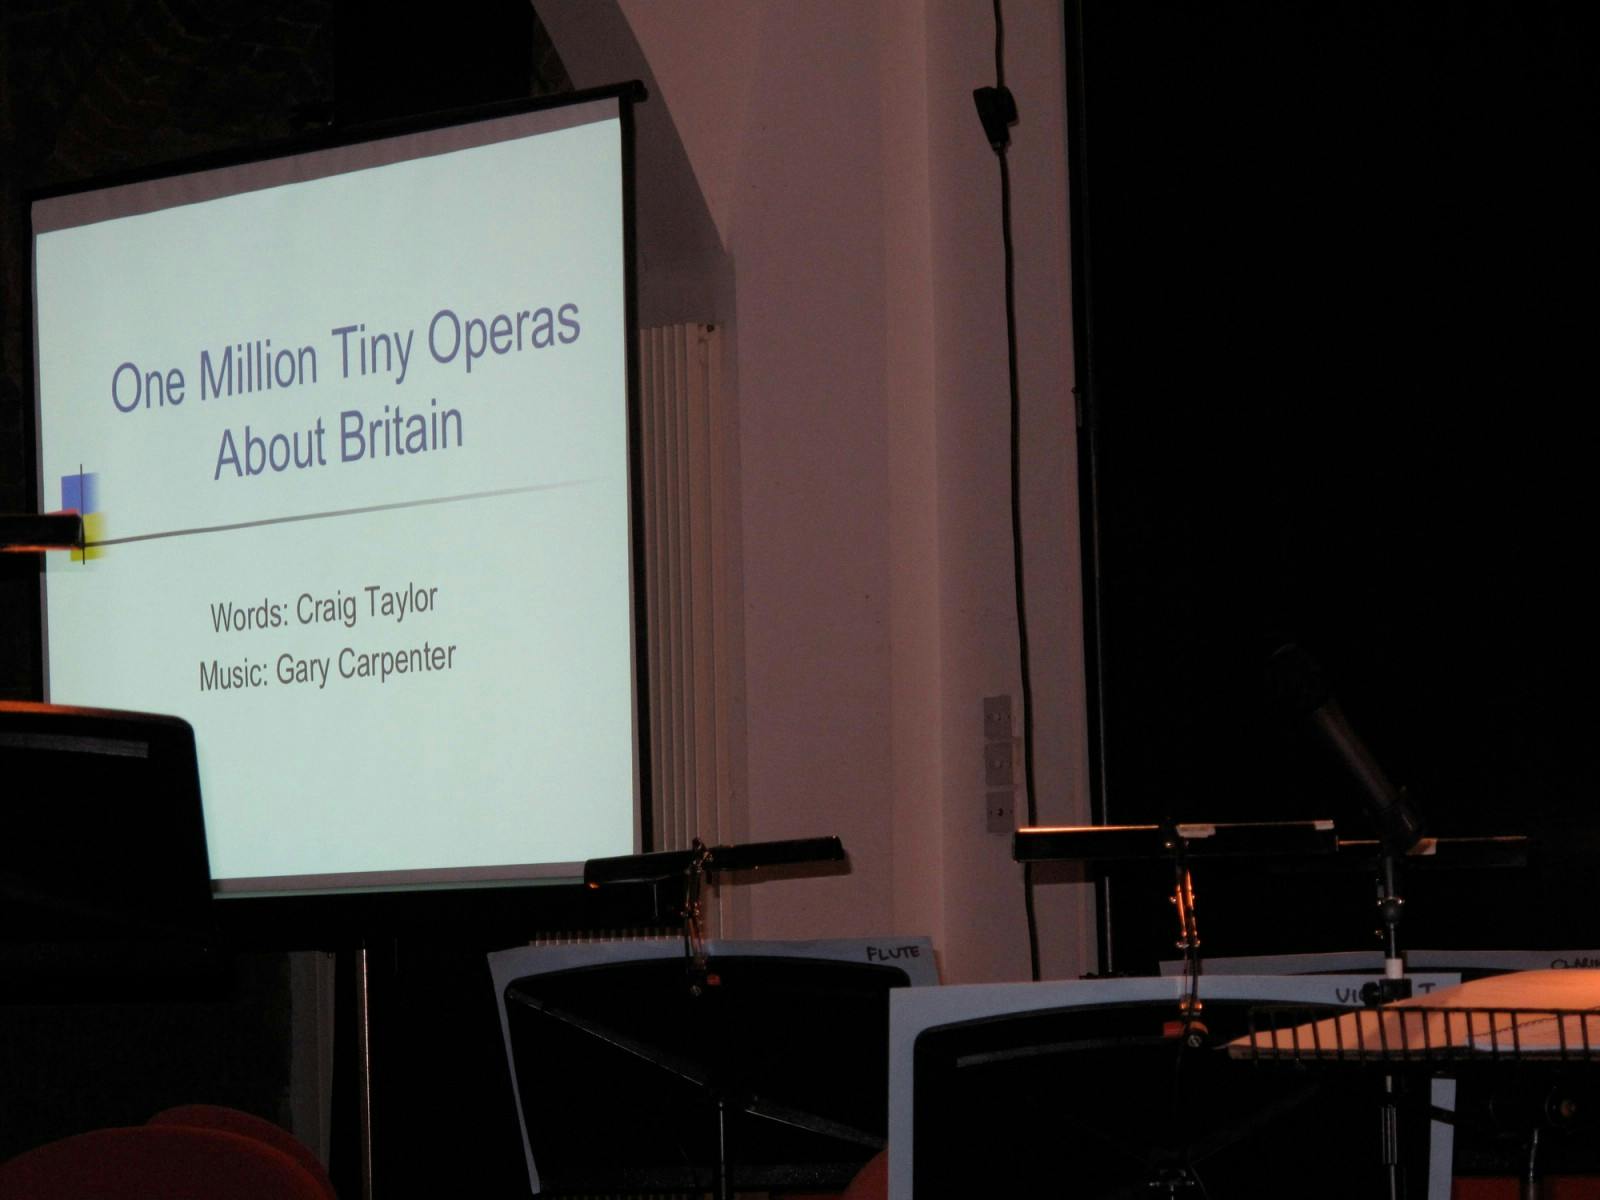 A projector screen with the text "One Million Tiny Operas About Britain"